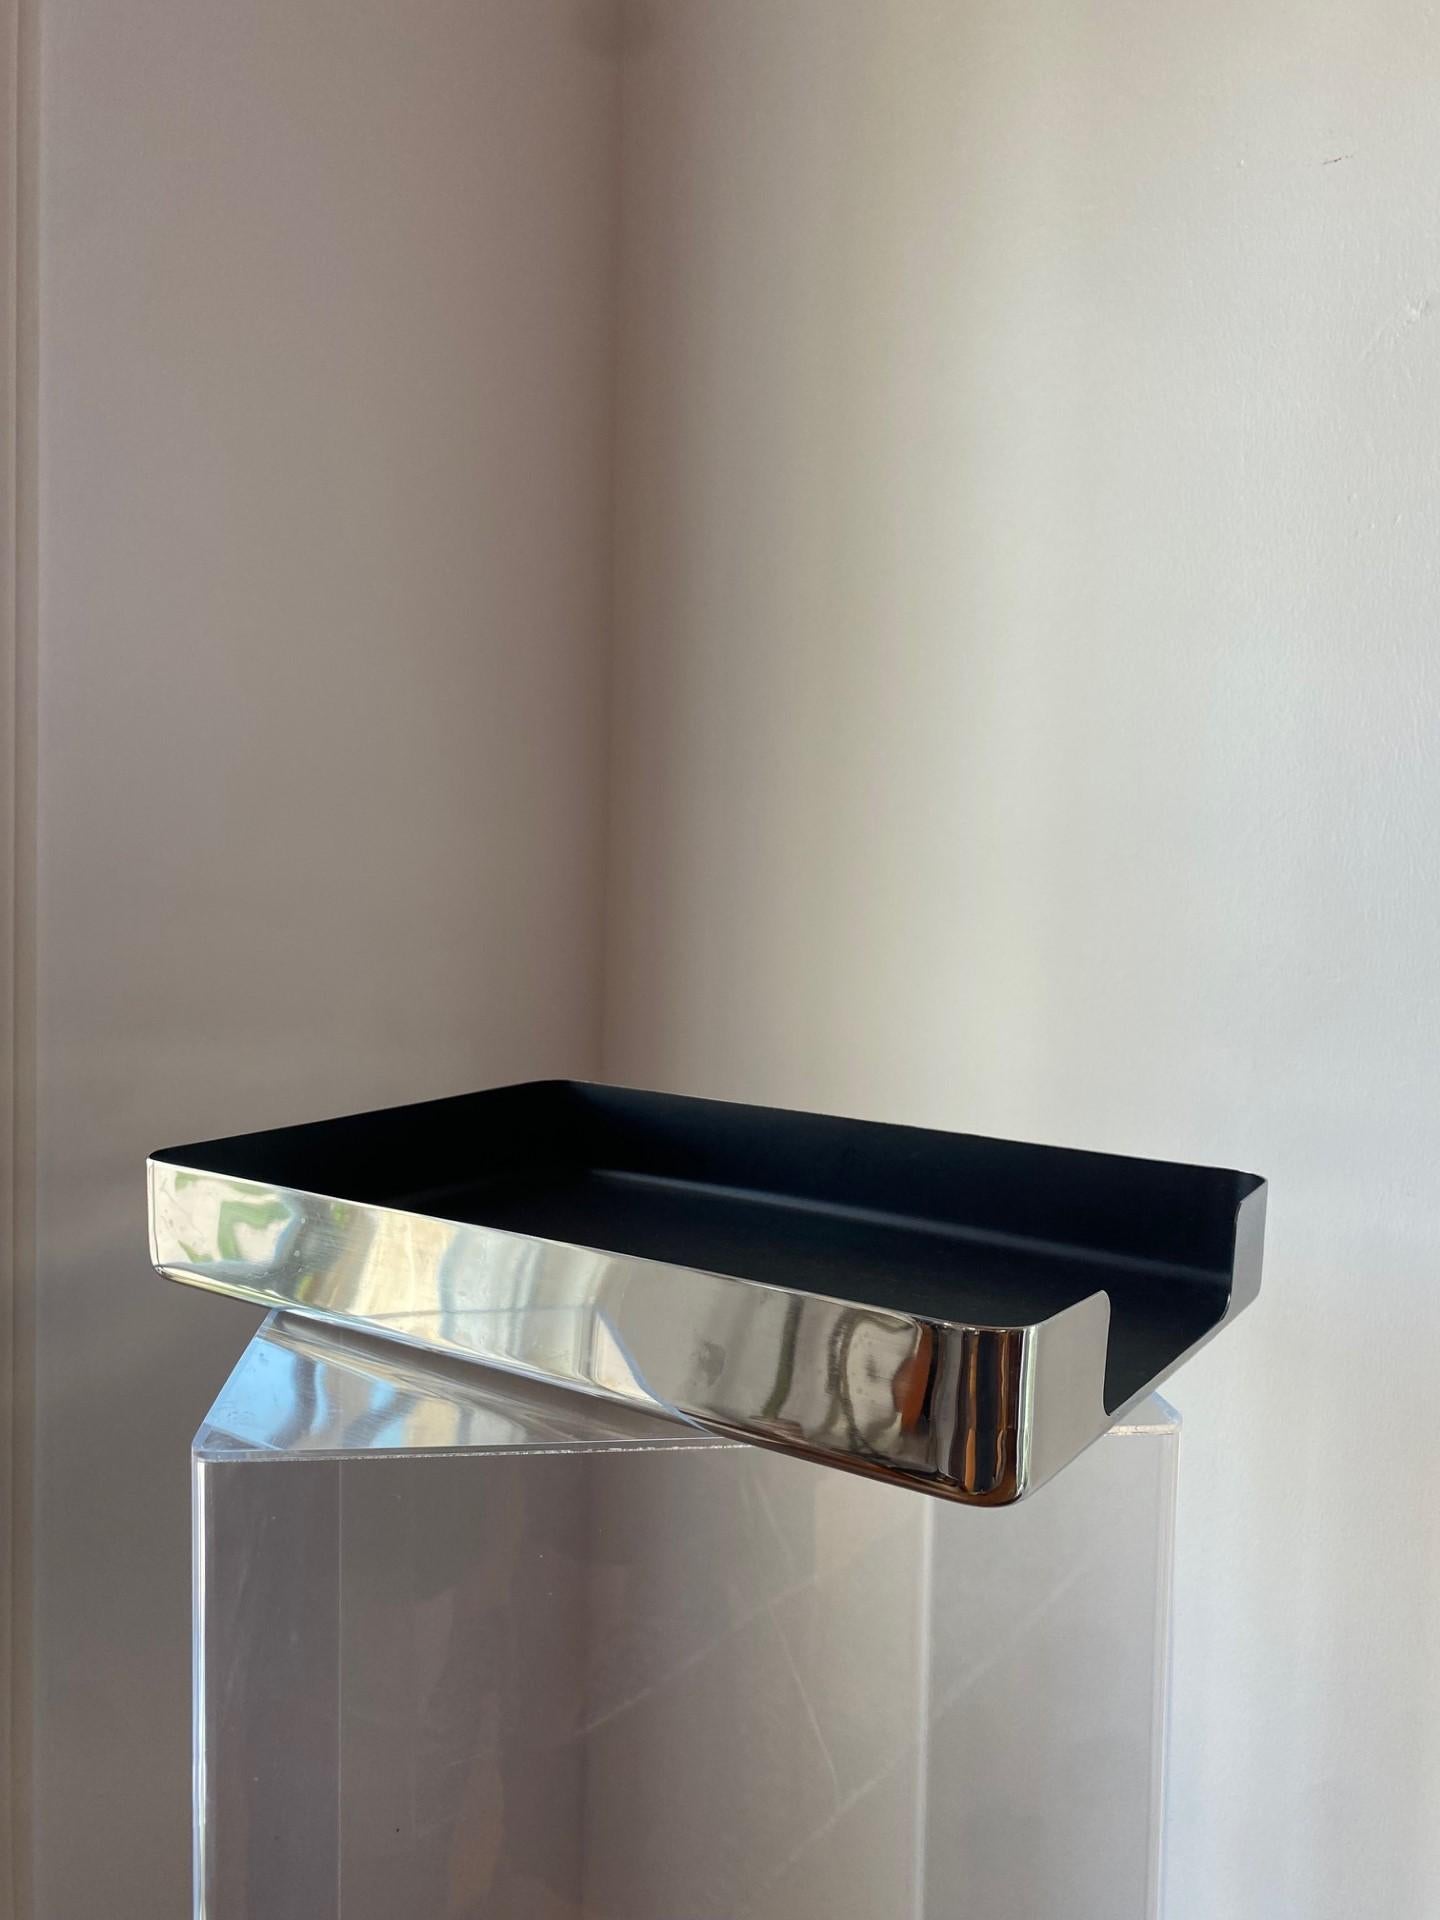 Beautiful letter tray in polished aluminium / chrome finish with black enamel lining.  In the style of Smokador.  Clean and minimalist design that is timeless and classic. Unique and rare.

Midcentury, Hollywood Regency, eclectic, coastal, modern,